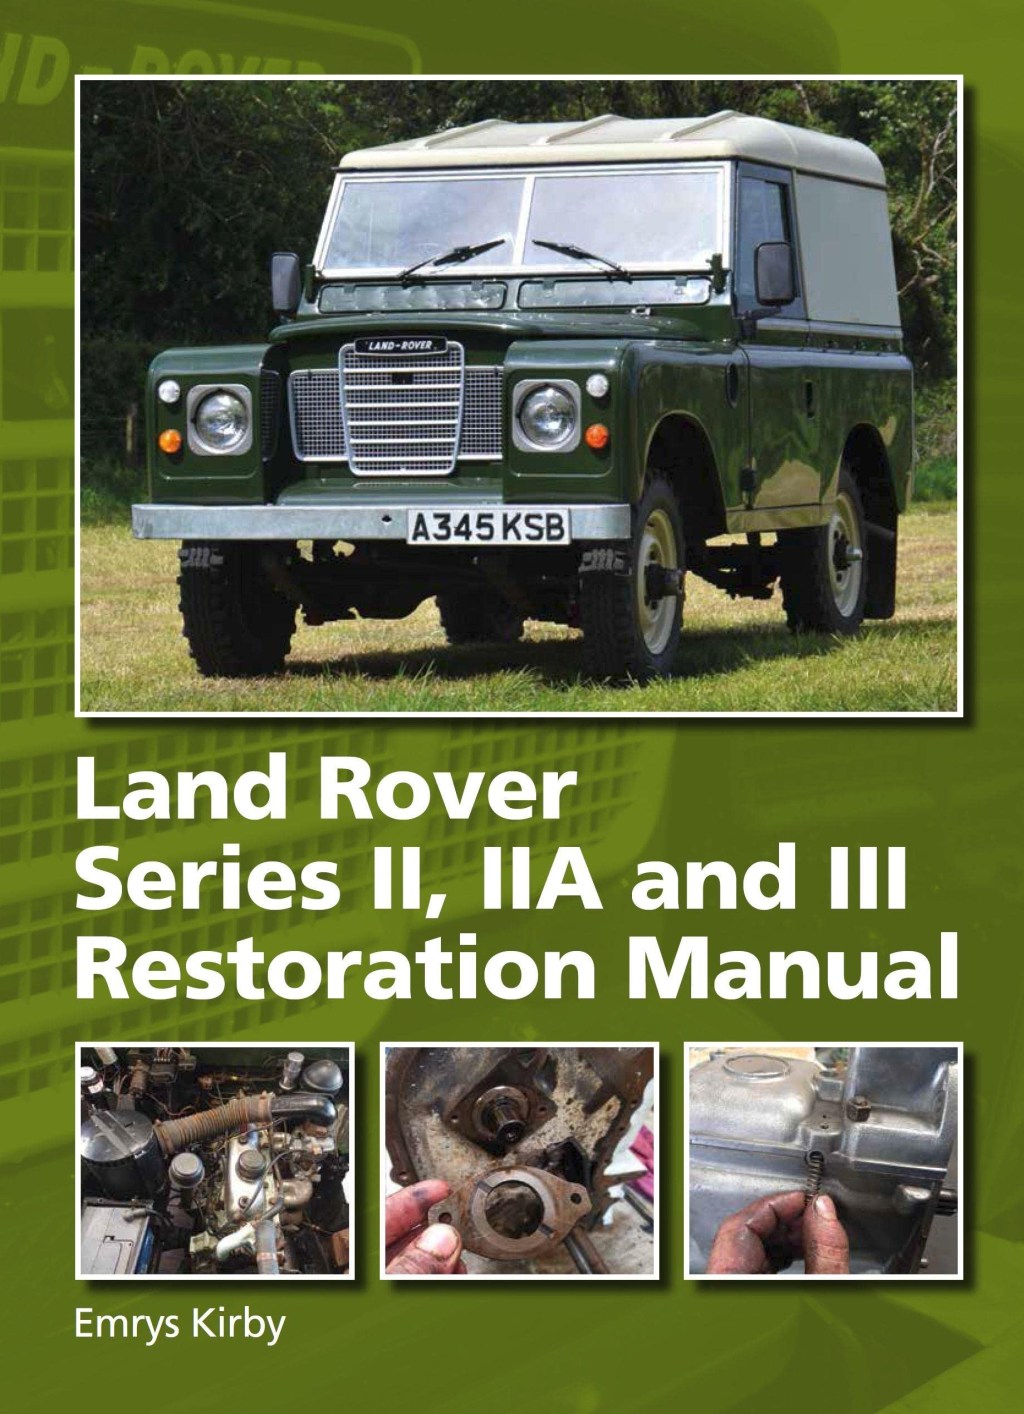 Picture of: Land Rover Series II, IIA and III — Restoration Manual